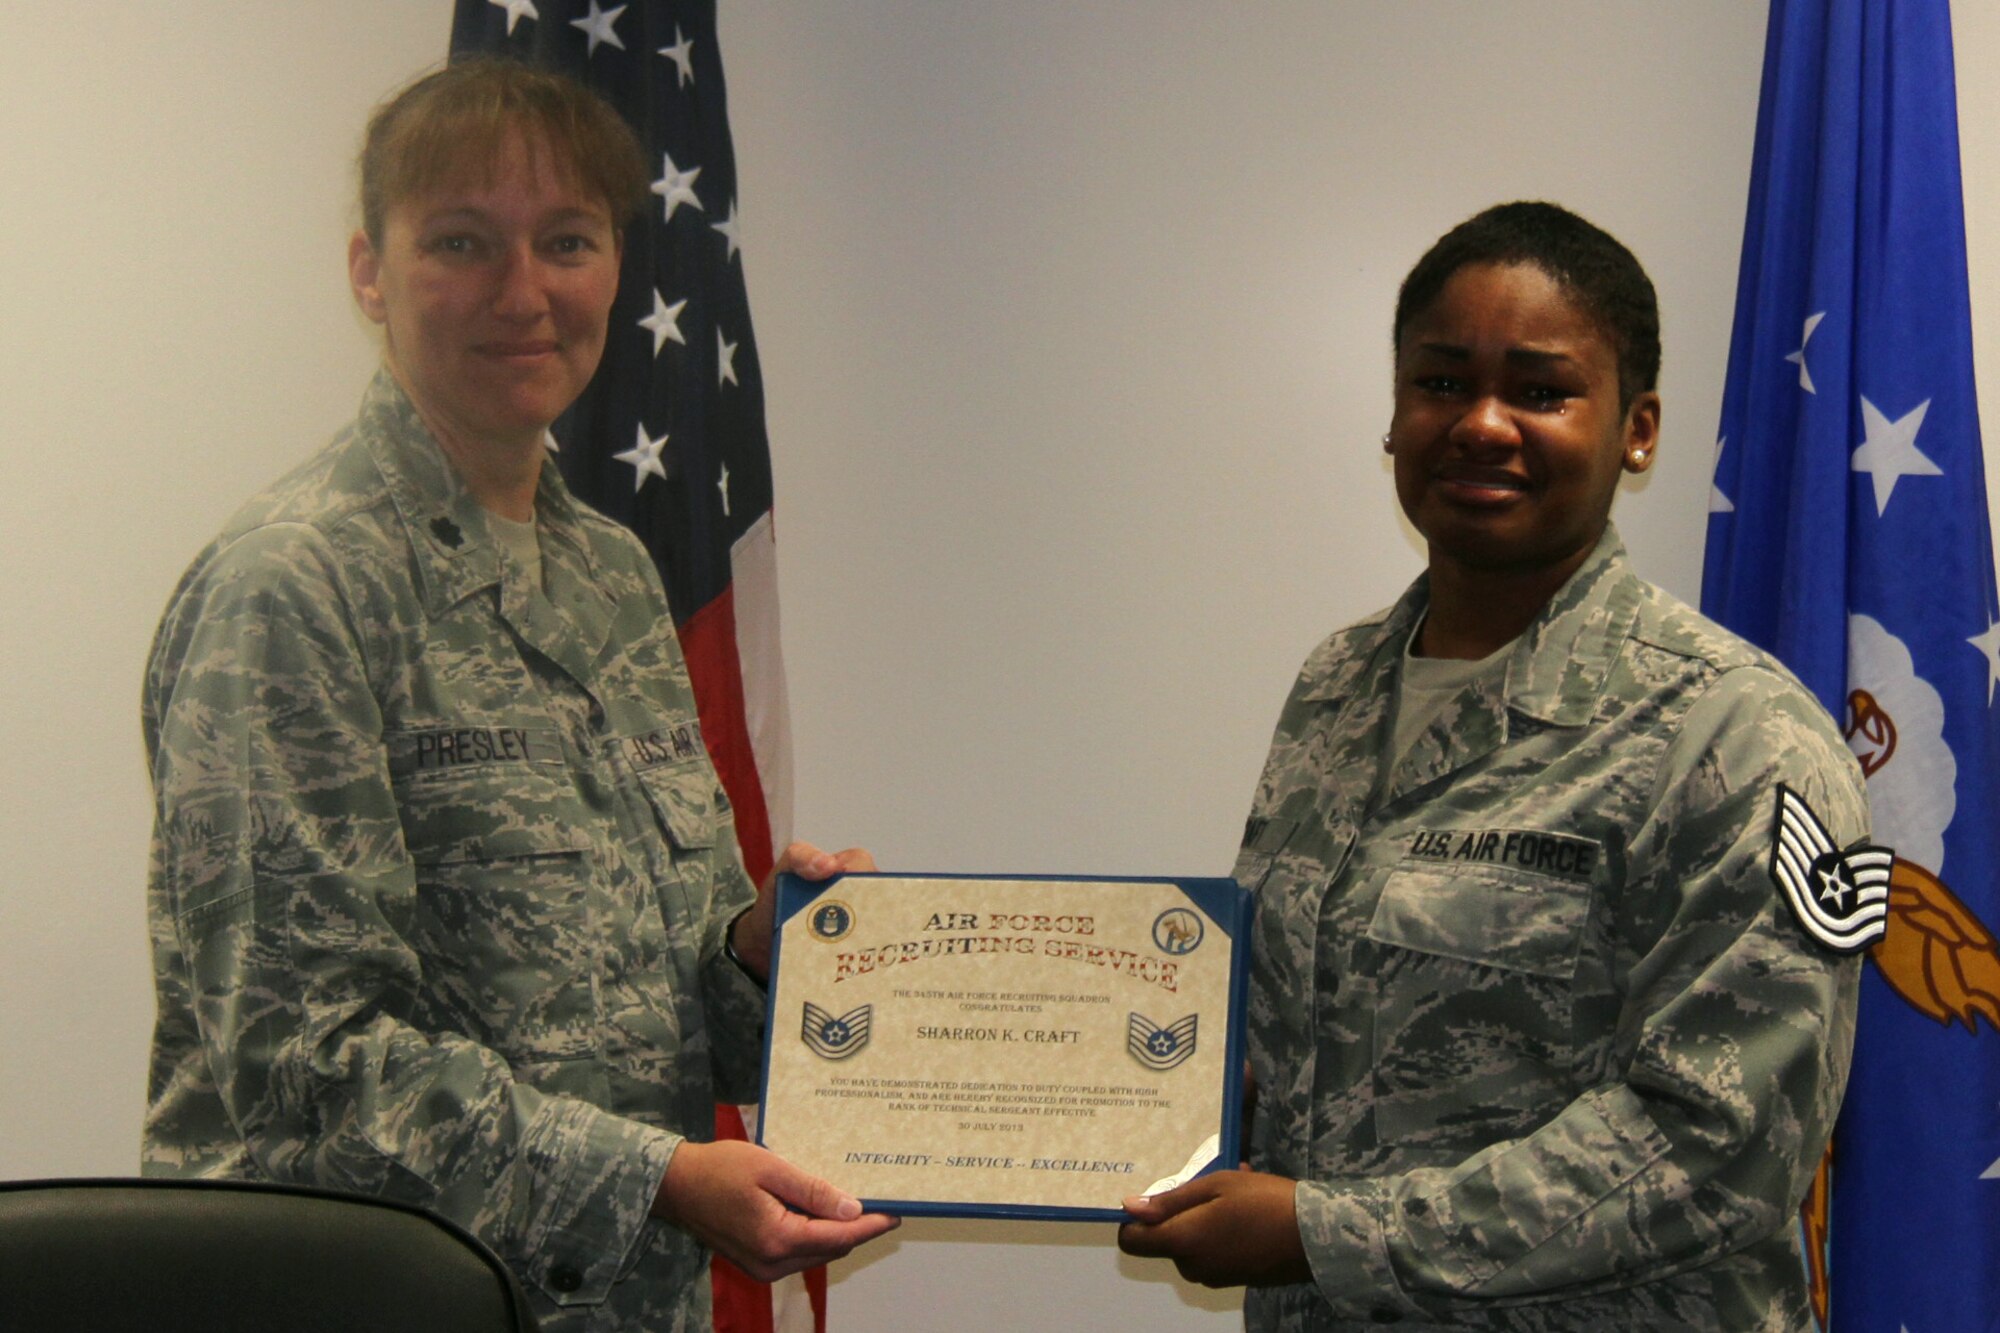 Lt. Col. Sharon Presley, 345th Recruiting Squadron commander (left) presents Staff Sgt. Sharron Craft, 345th RCS operations noncommissioned officer, a certificate following her promotion to technical sergeant through the Stripes for Exceptional Performers program July 31. Craft had recently joined the 345th RCS after completing her tour as a 342nd RCS health professions recruiter, and was still in-processing when the surprise promotion occurred. (U.S. Air Force photo/Tech. Sgt. Daniel Hopper)